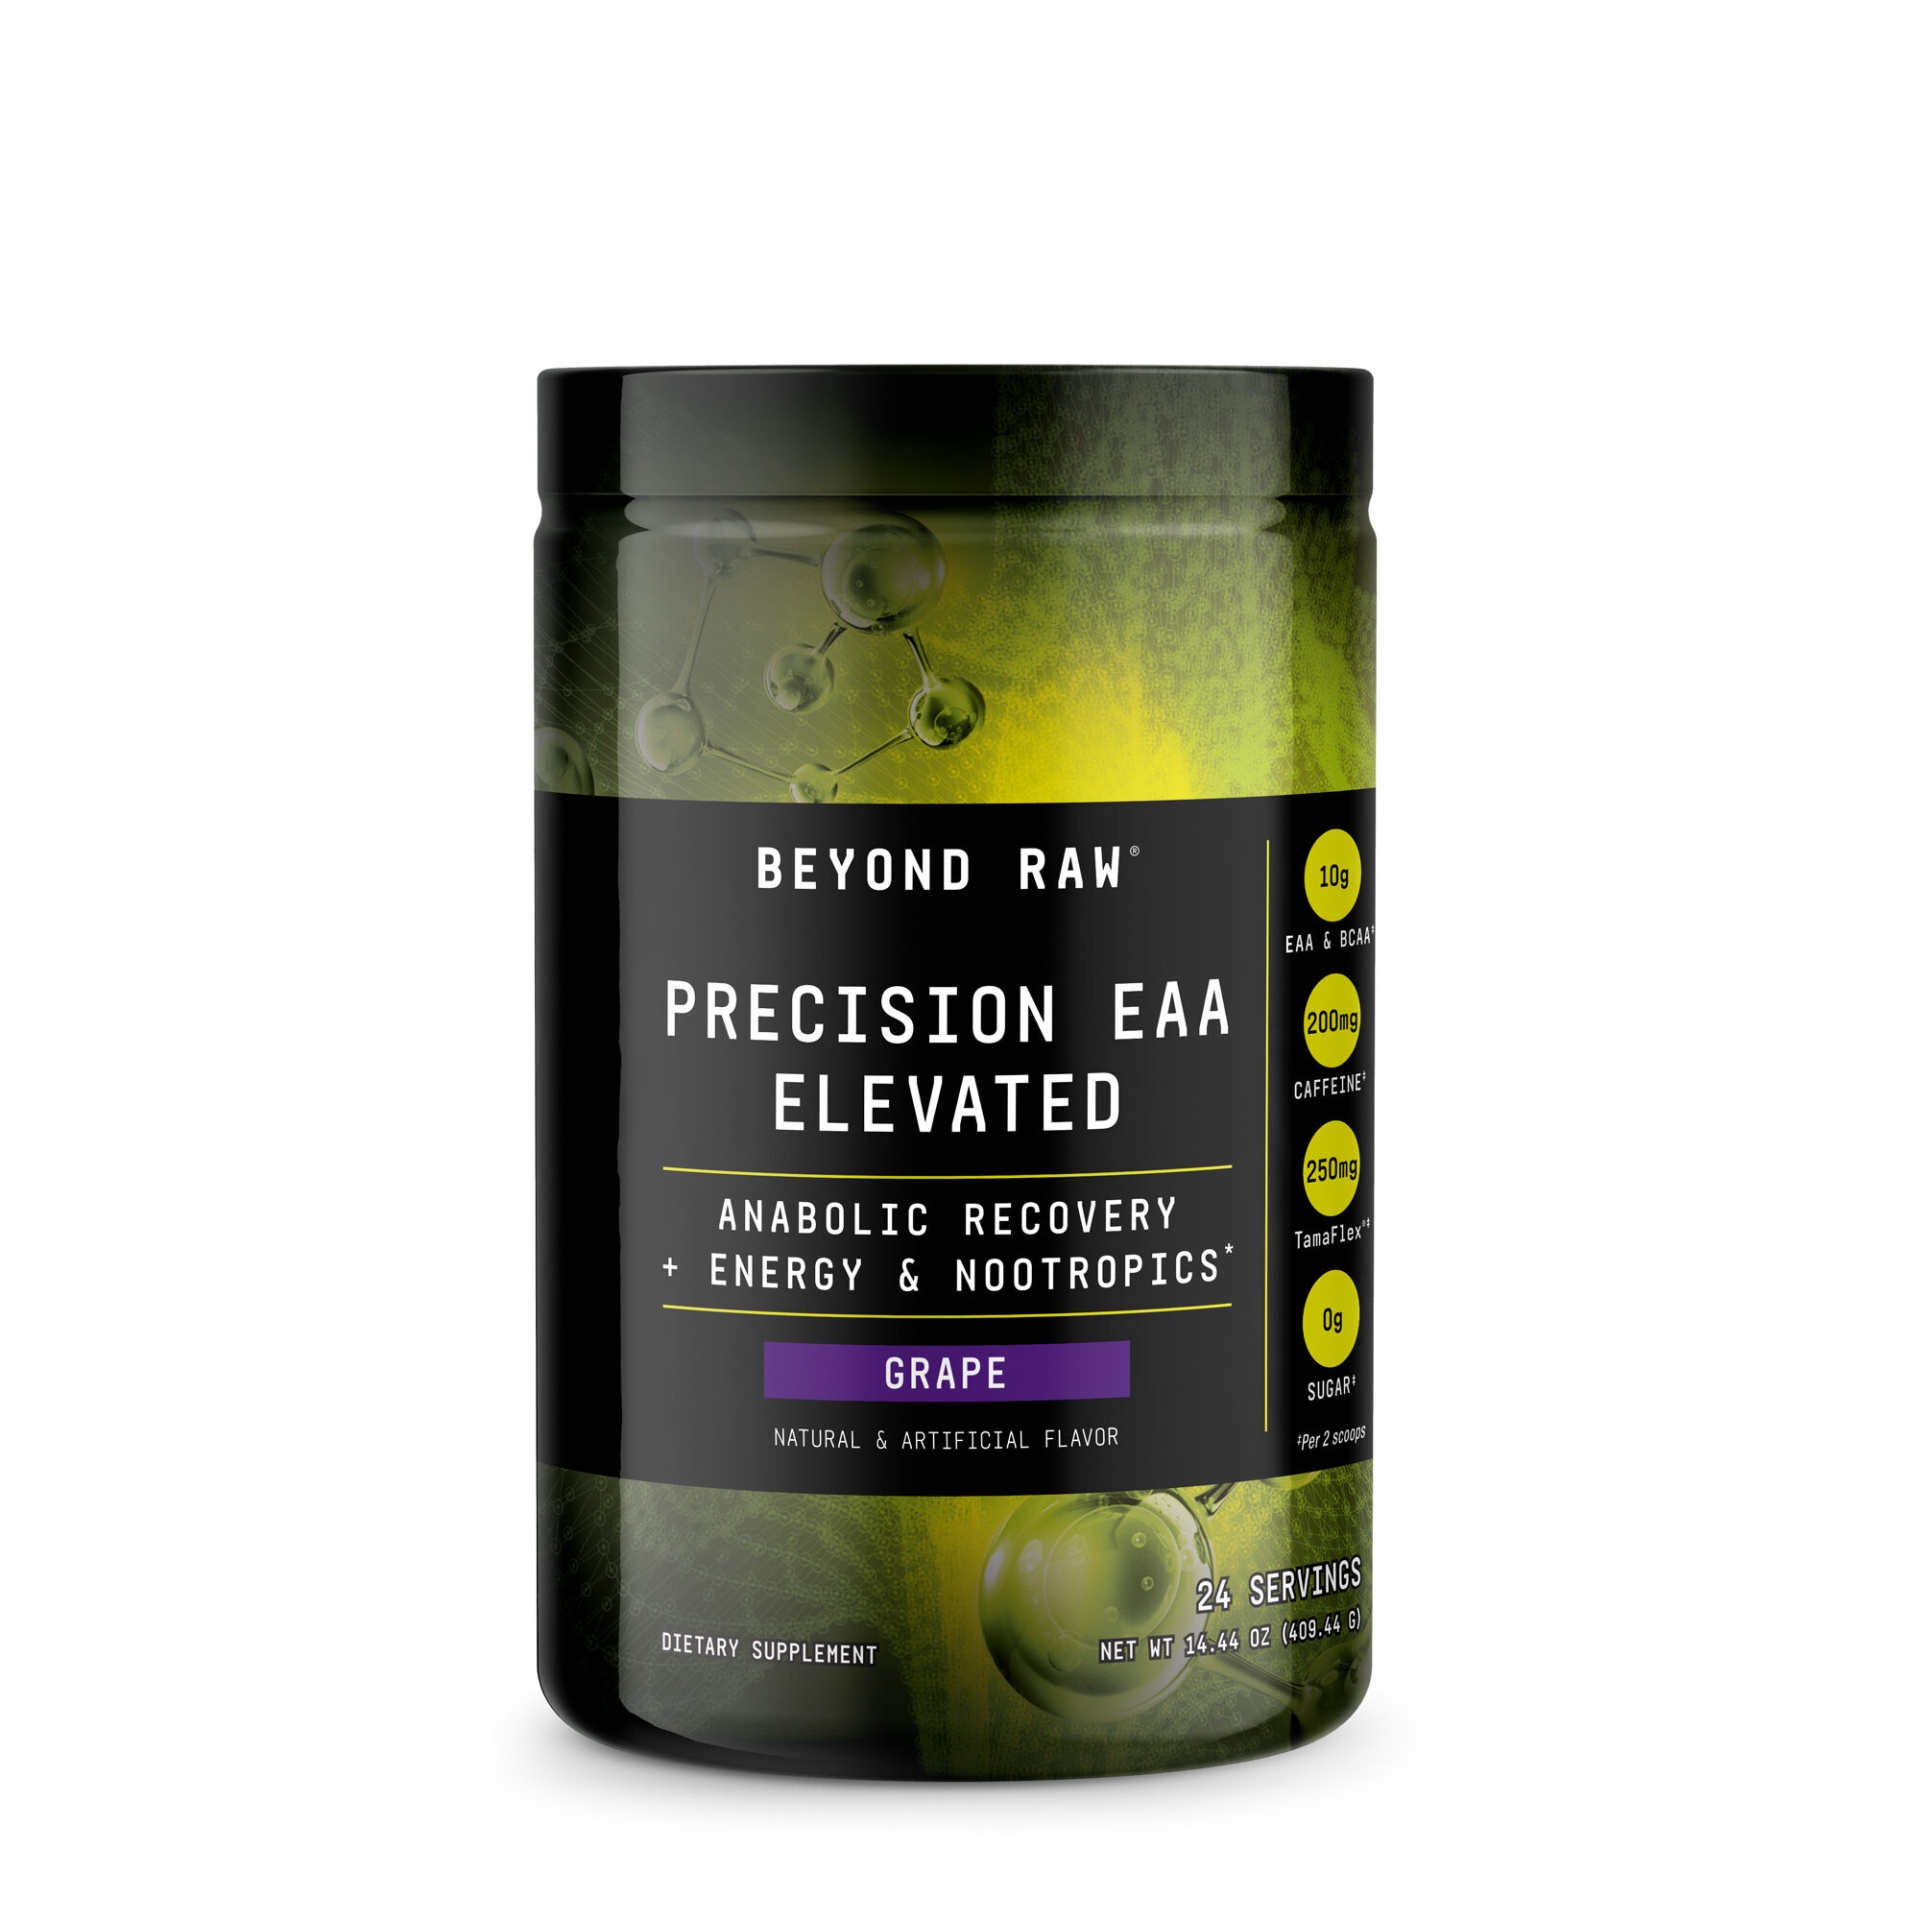 Beyond Raw Precision EAA Elevated - Grape 1 ct | Shipt